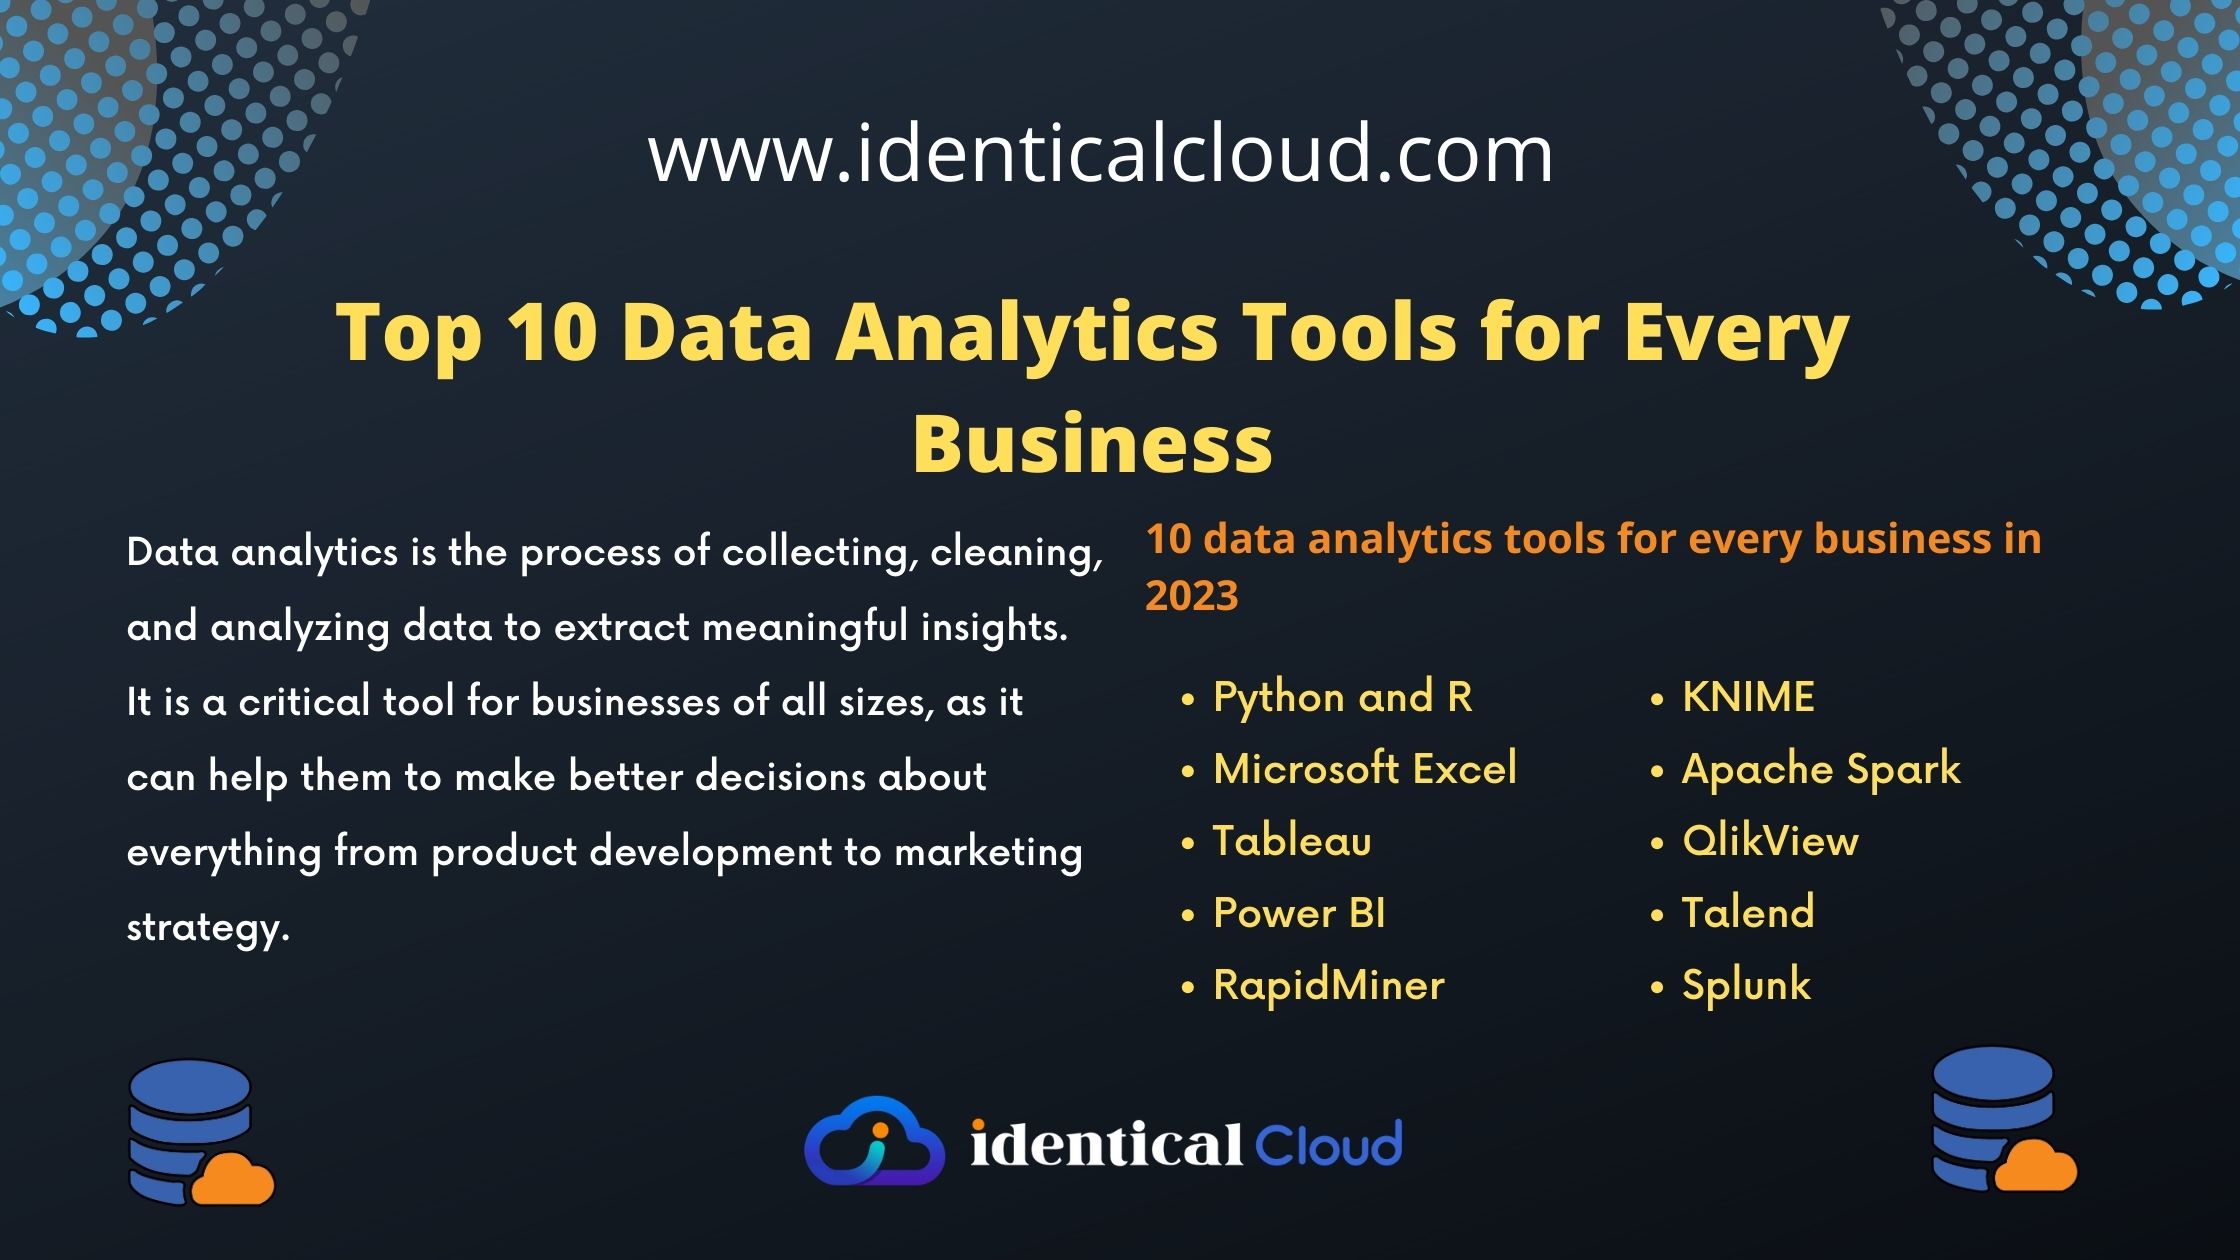 Top 10 Data Analytics Tools for Every Business - identicalcloud.com